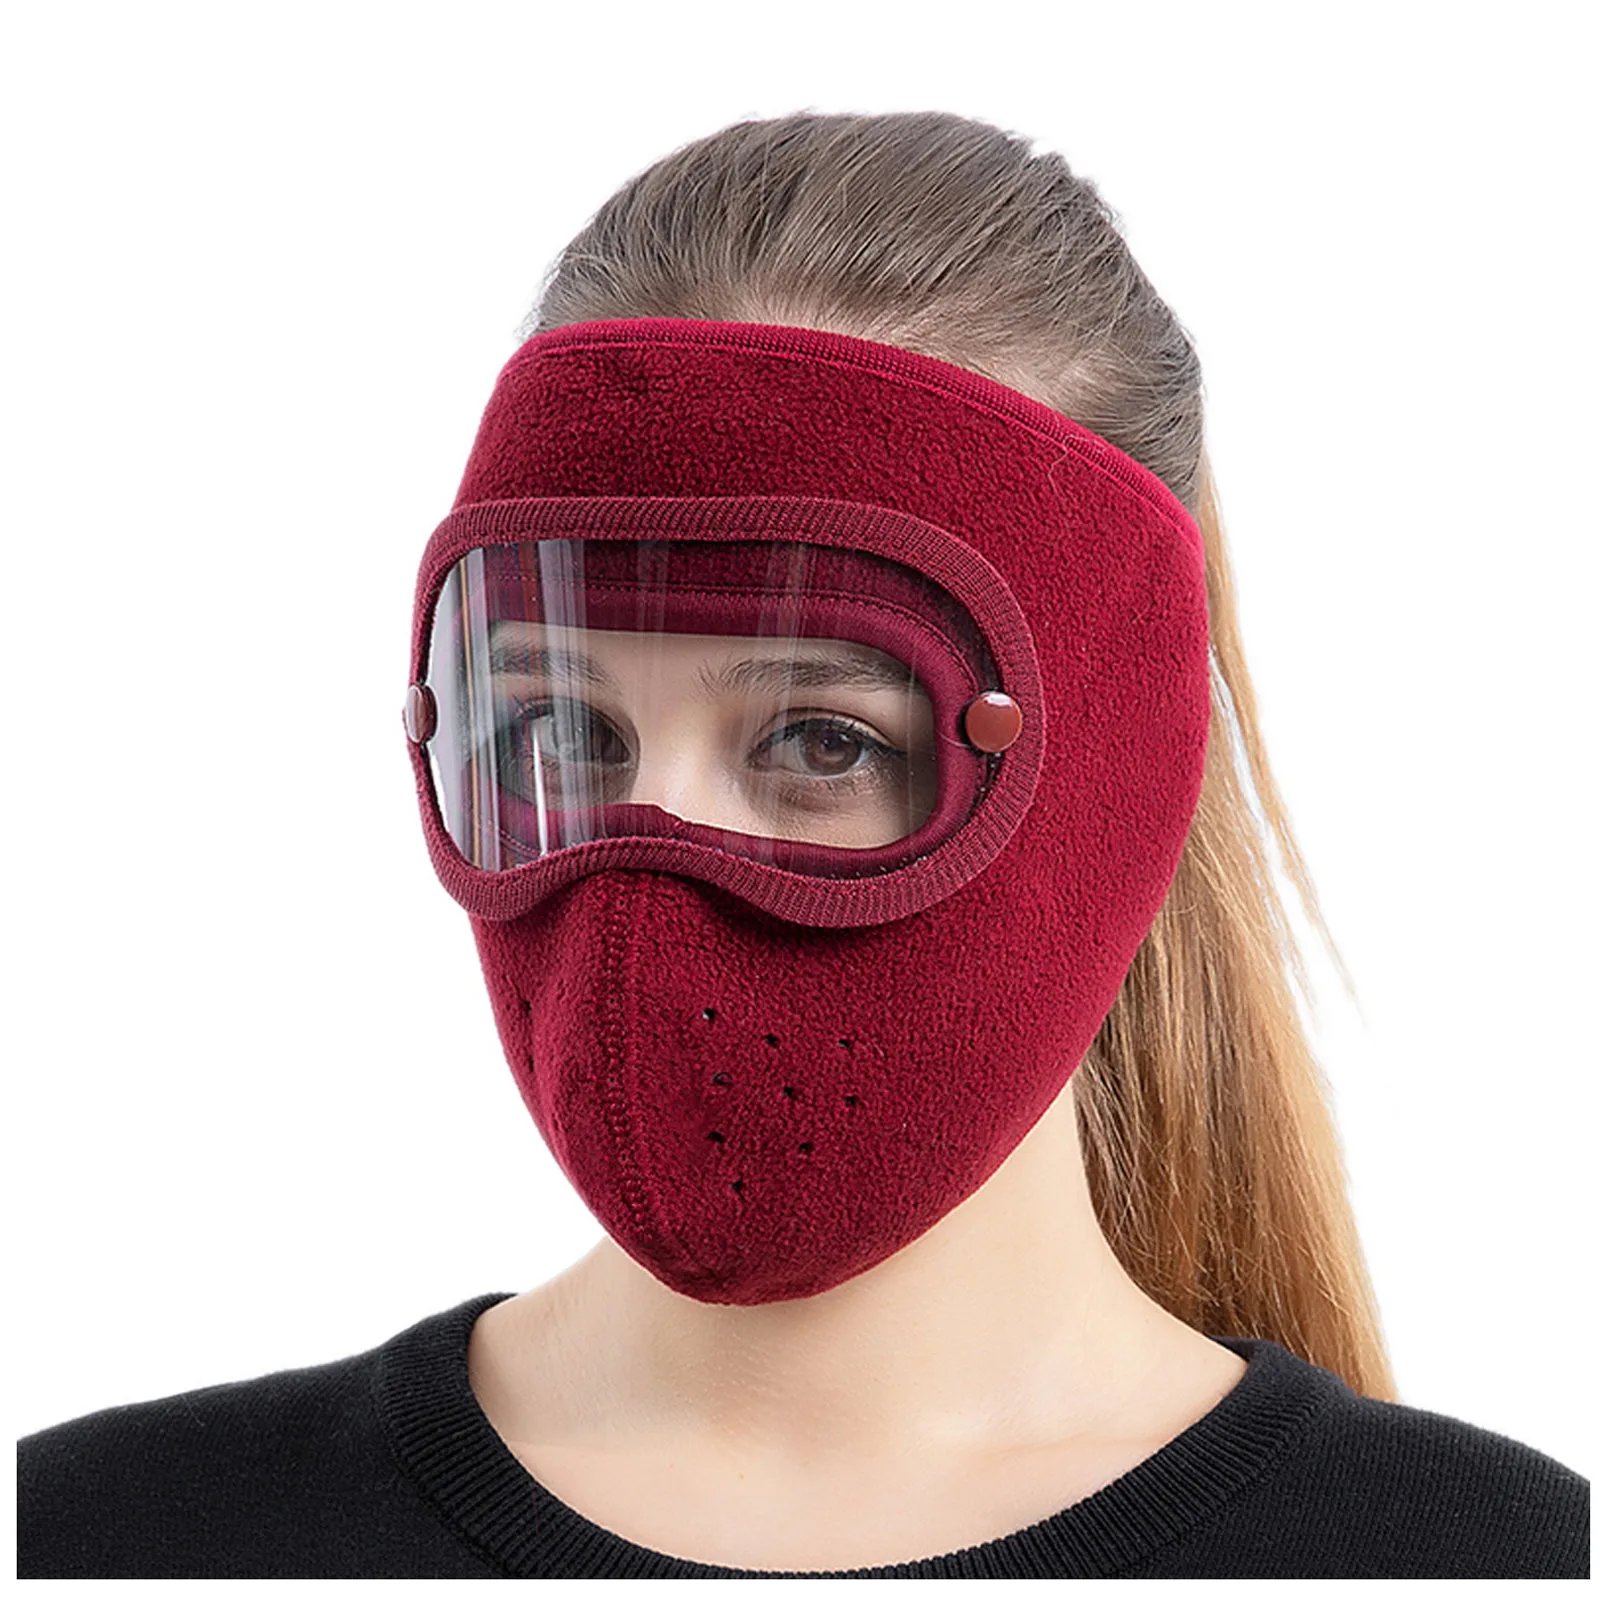 Winter Windproof Anti Dust Full Face Mask Cycling Ski Breathable Masks High Definition Anti Fog Goggles Hood Cover